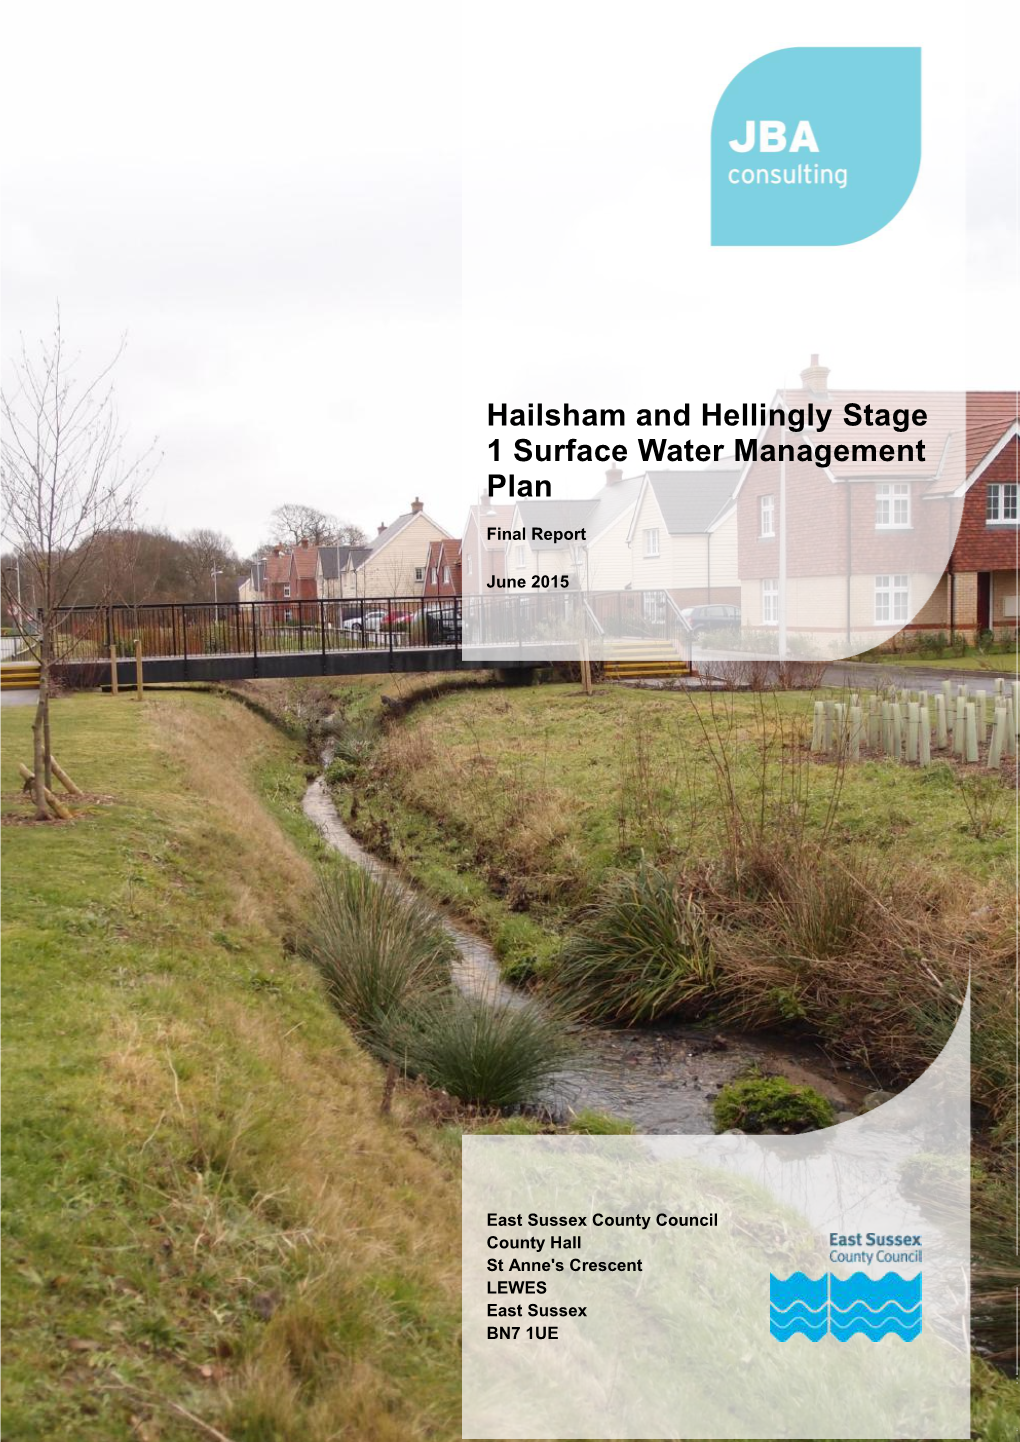 Hailsham and Hellingly Stage 1 Surface Water Management Plan